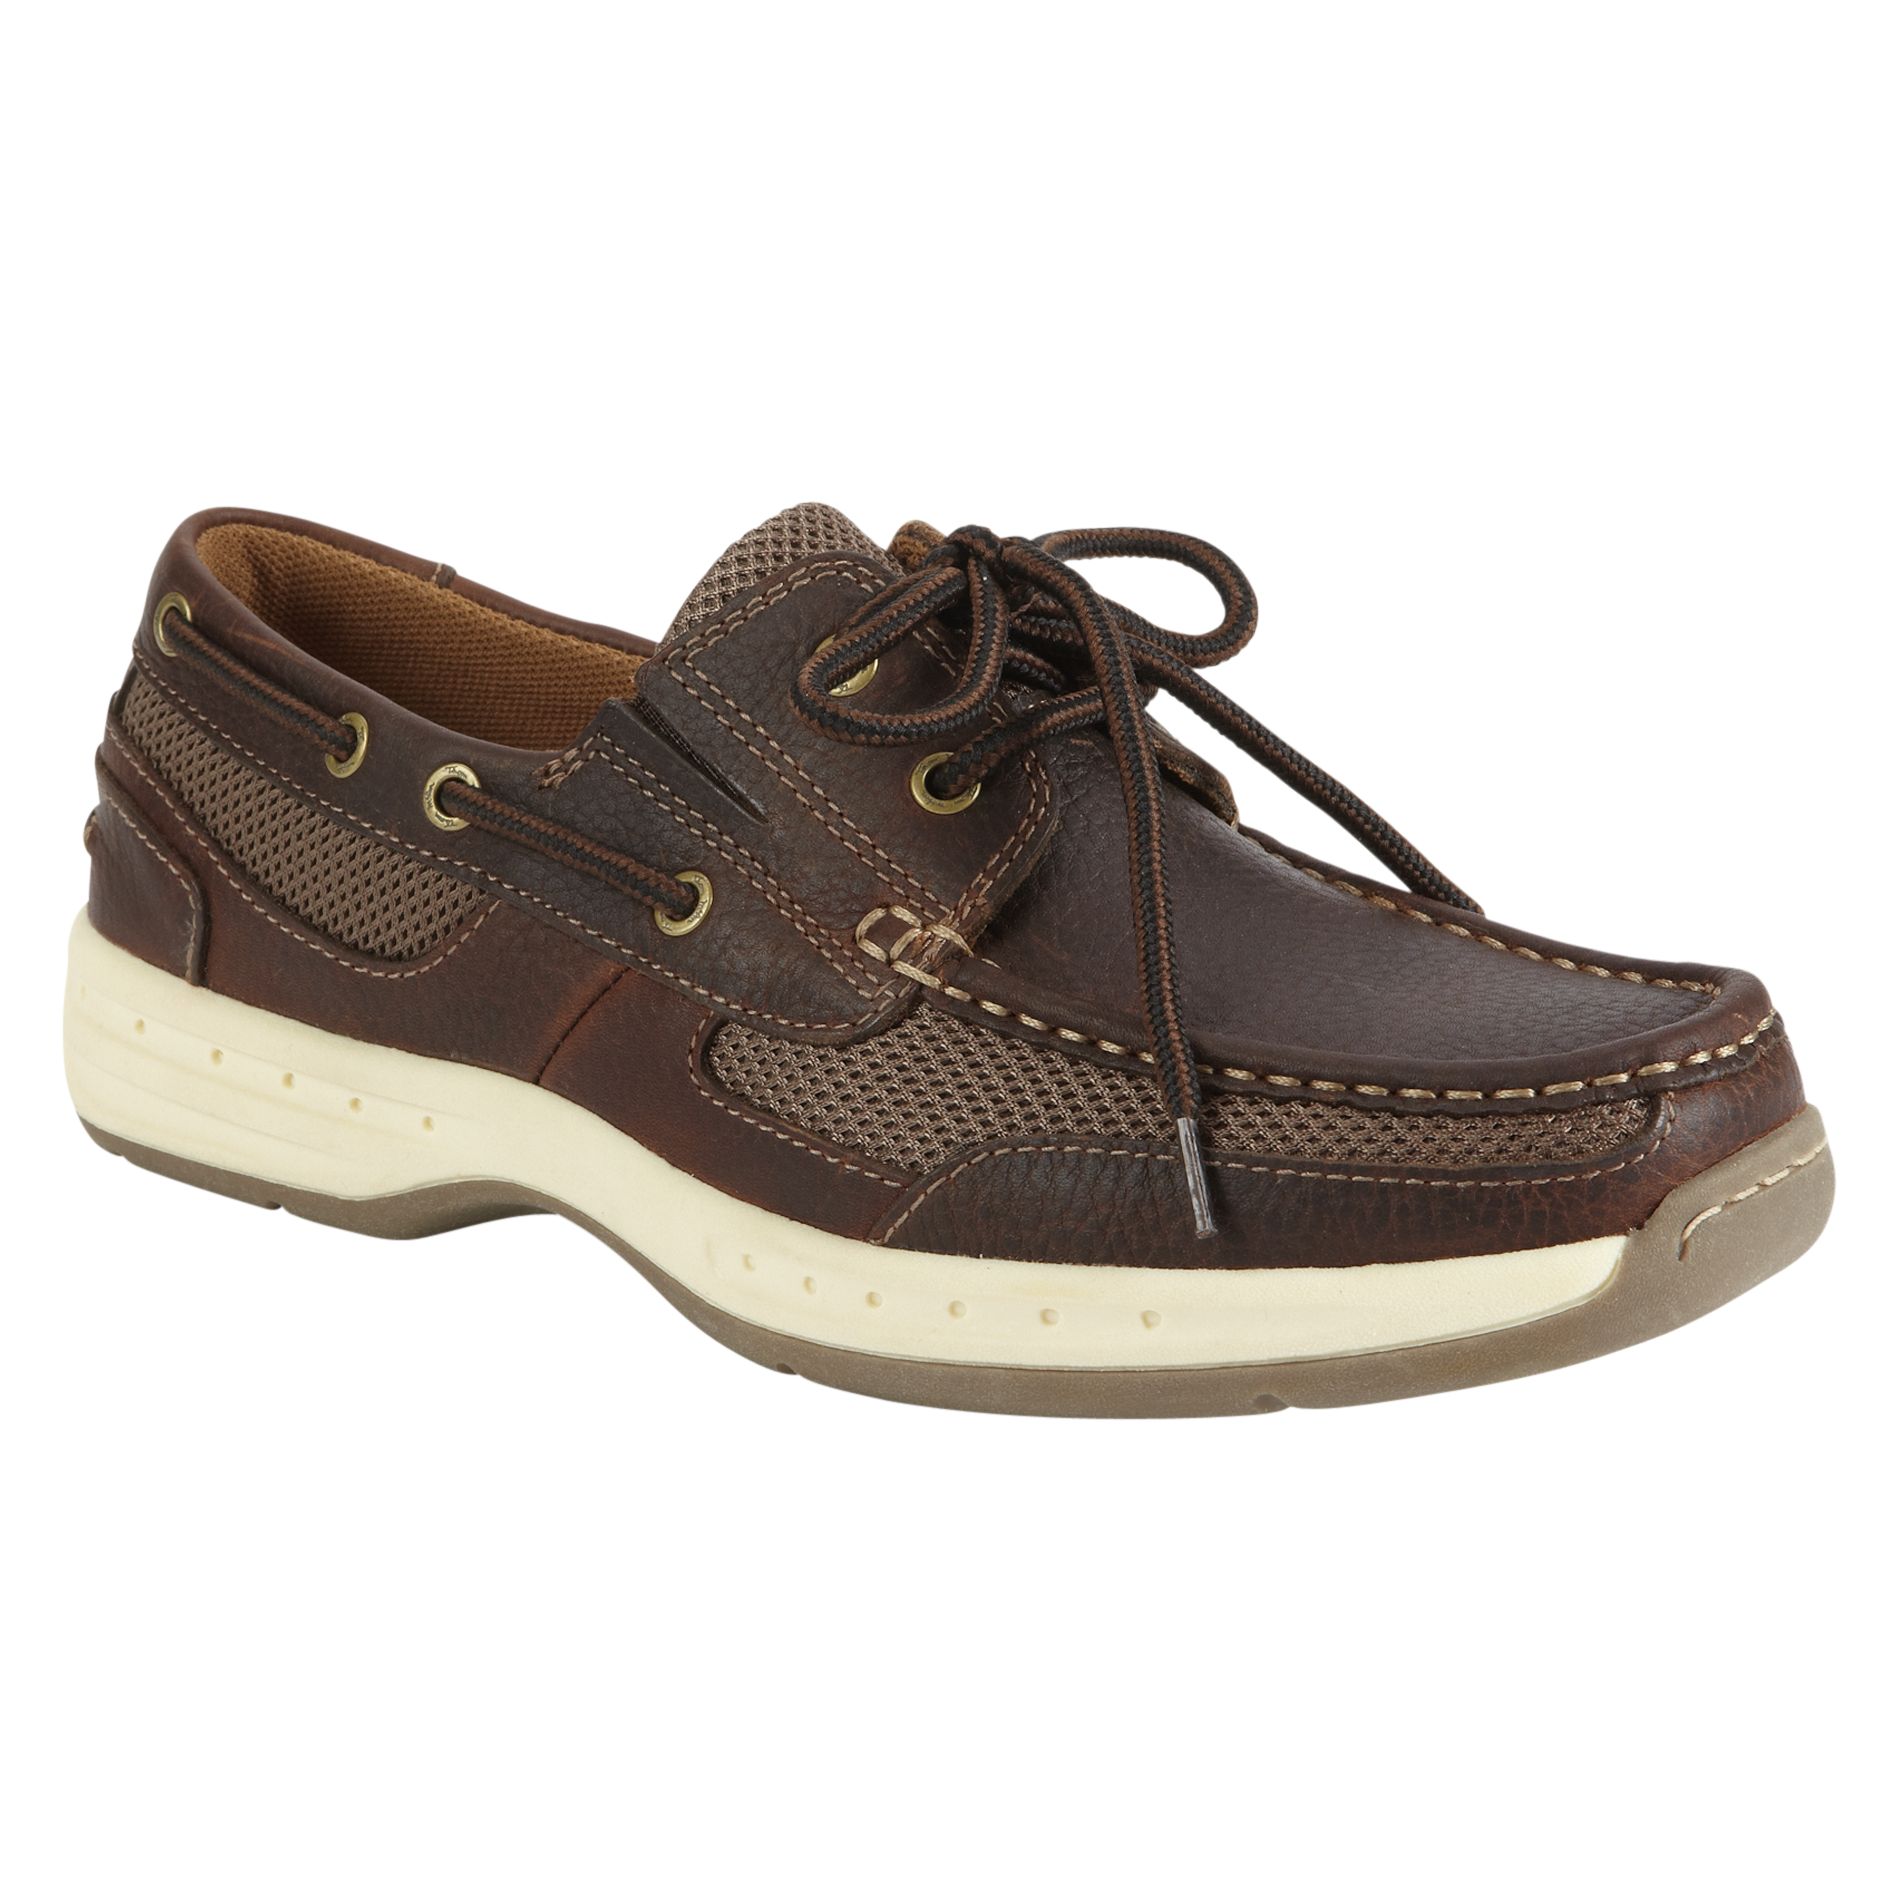 Thom McAn Men's Mooring Leather Boat Shoe - Brown